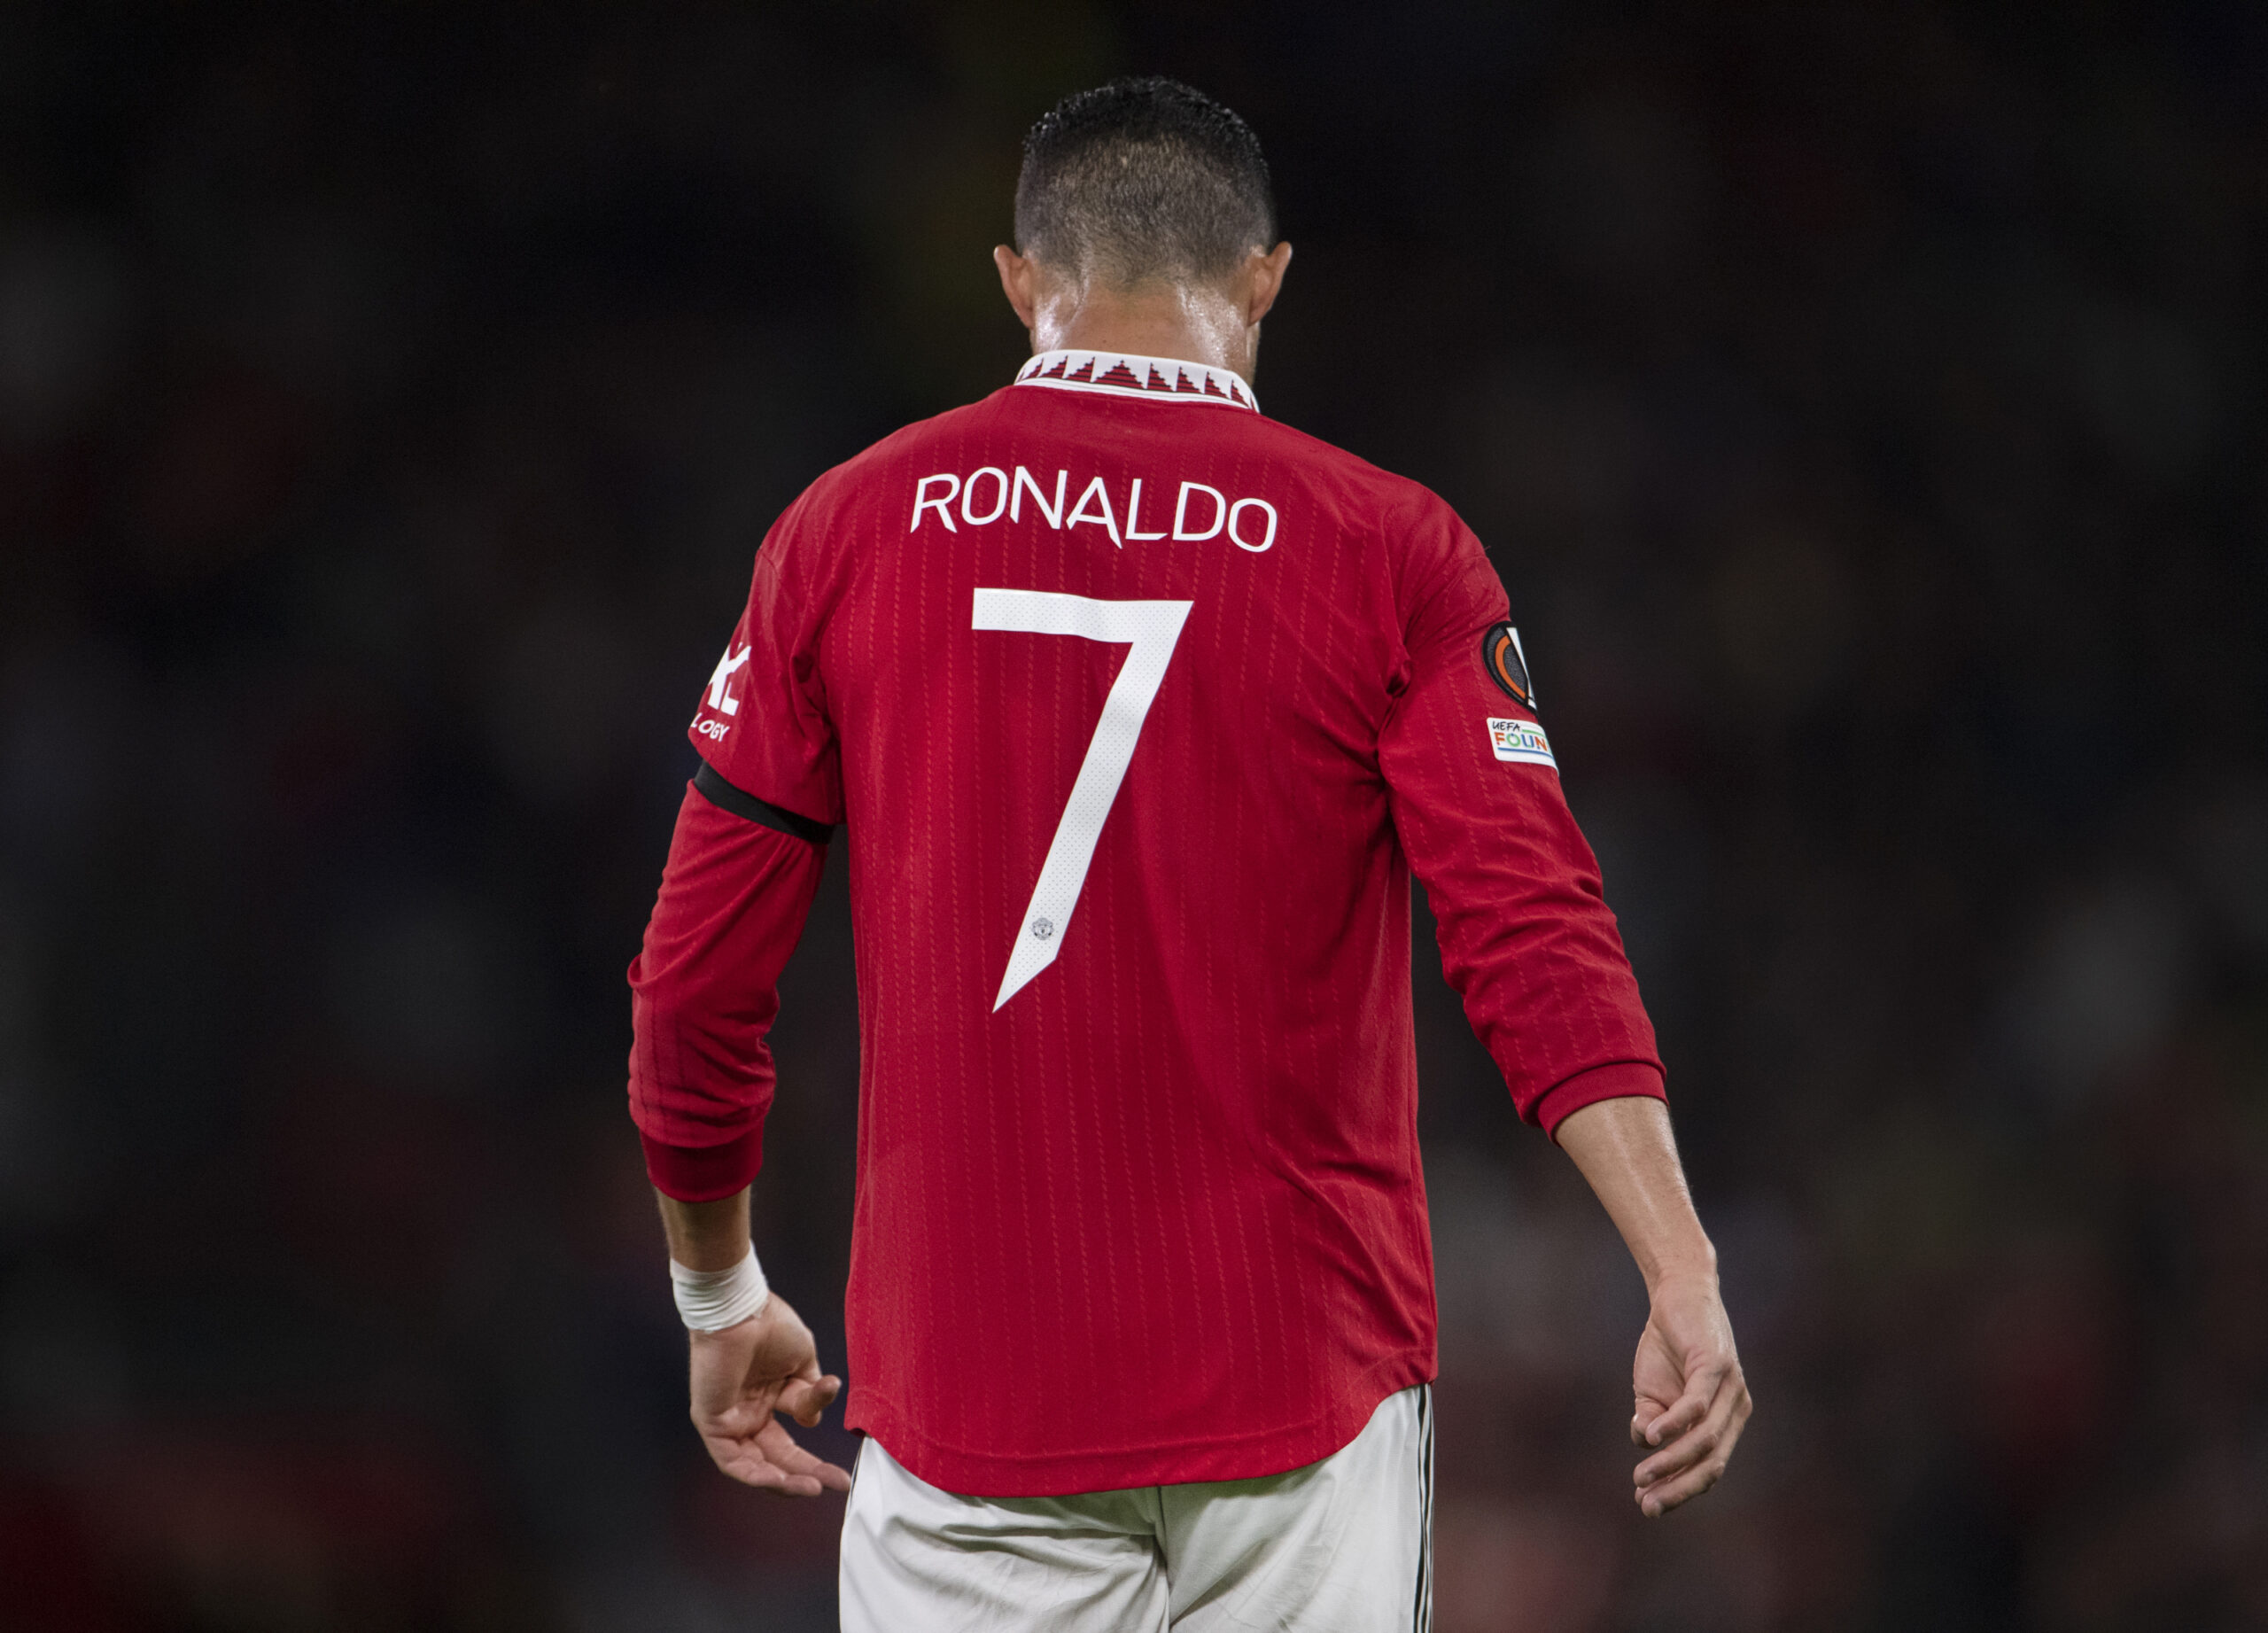 Ronaldo wear red jersey with his Name Ronaldo and No. 7